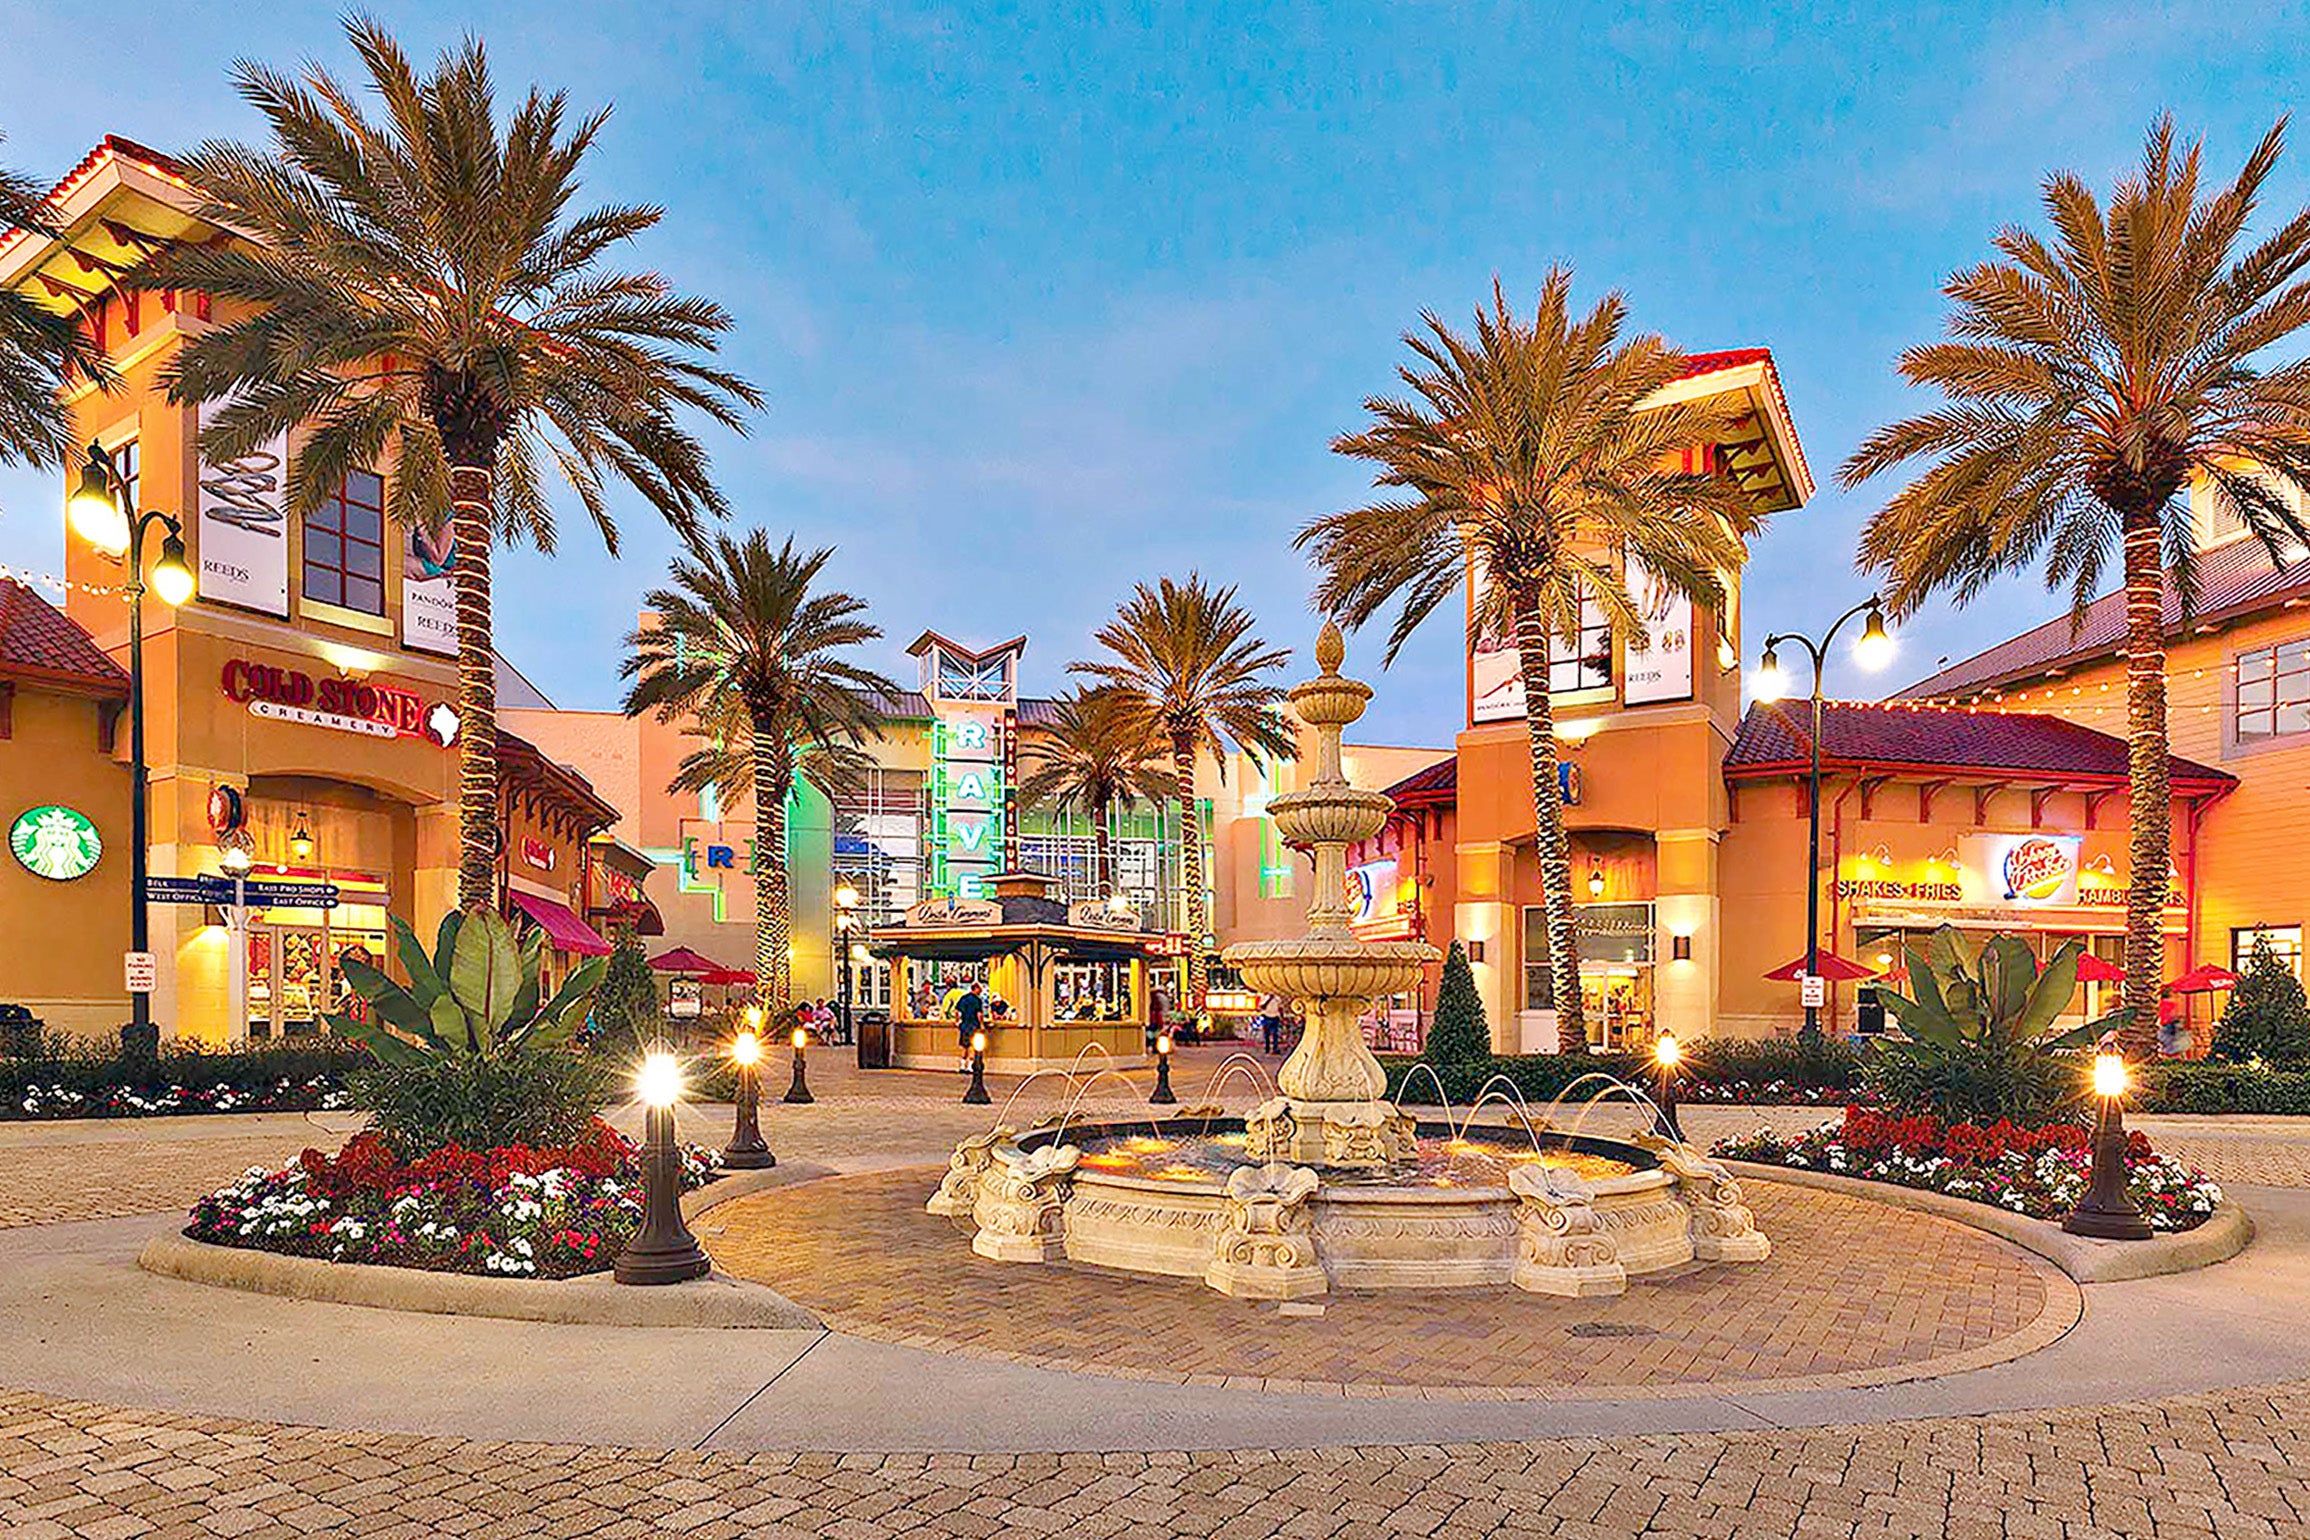 Shopping and dining nearby at Destin Commons